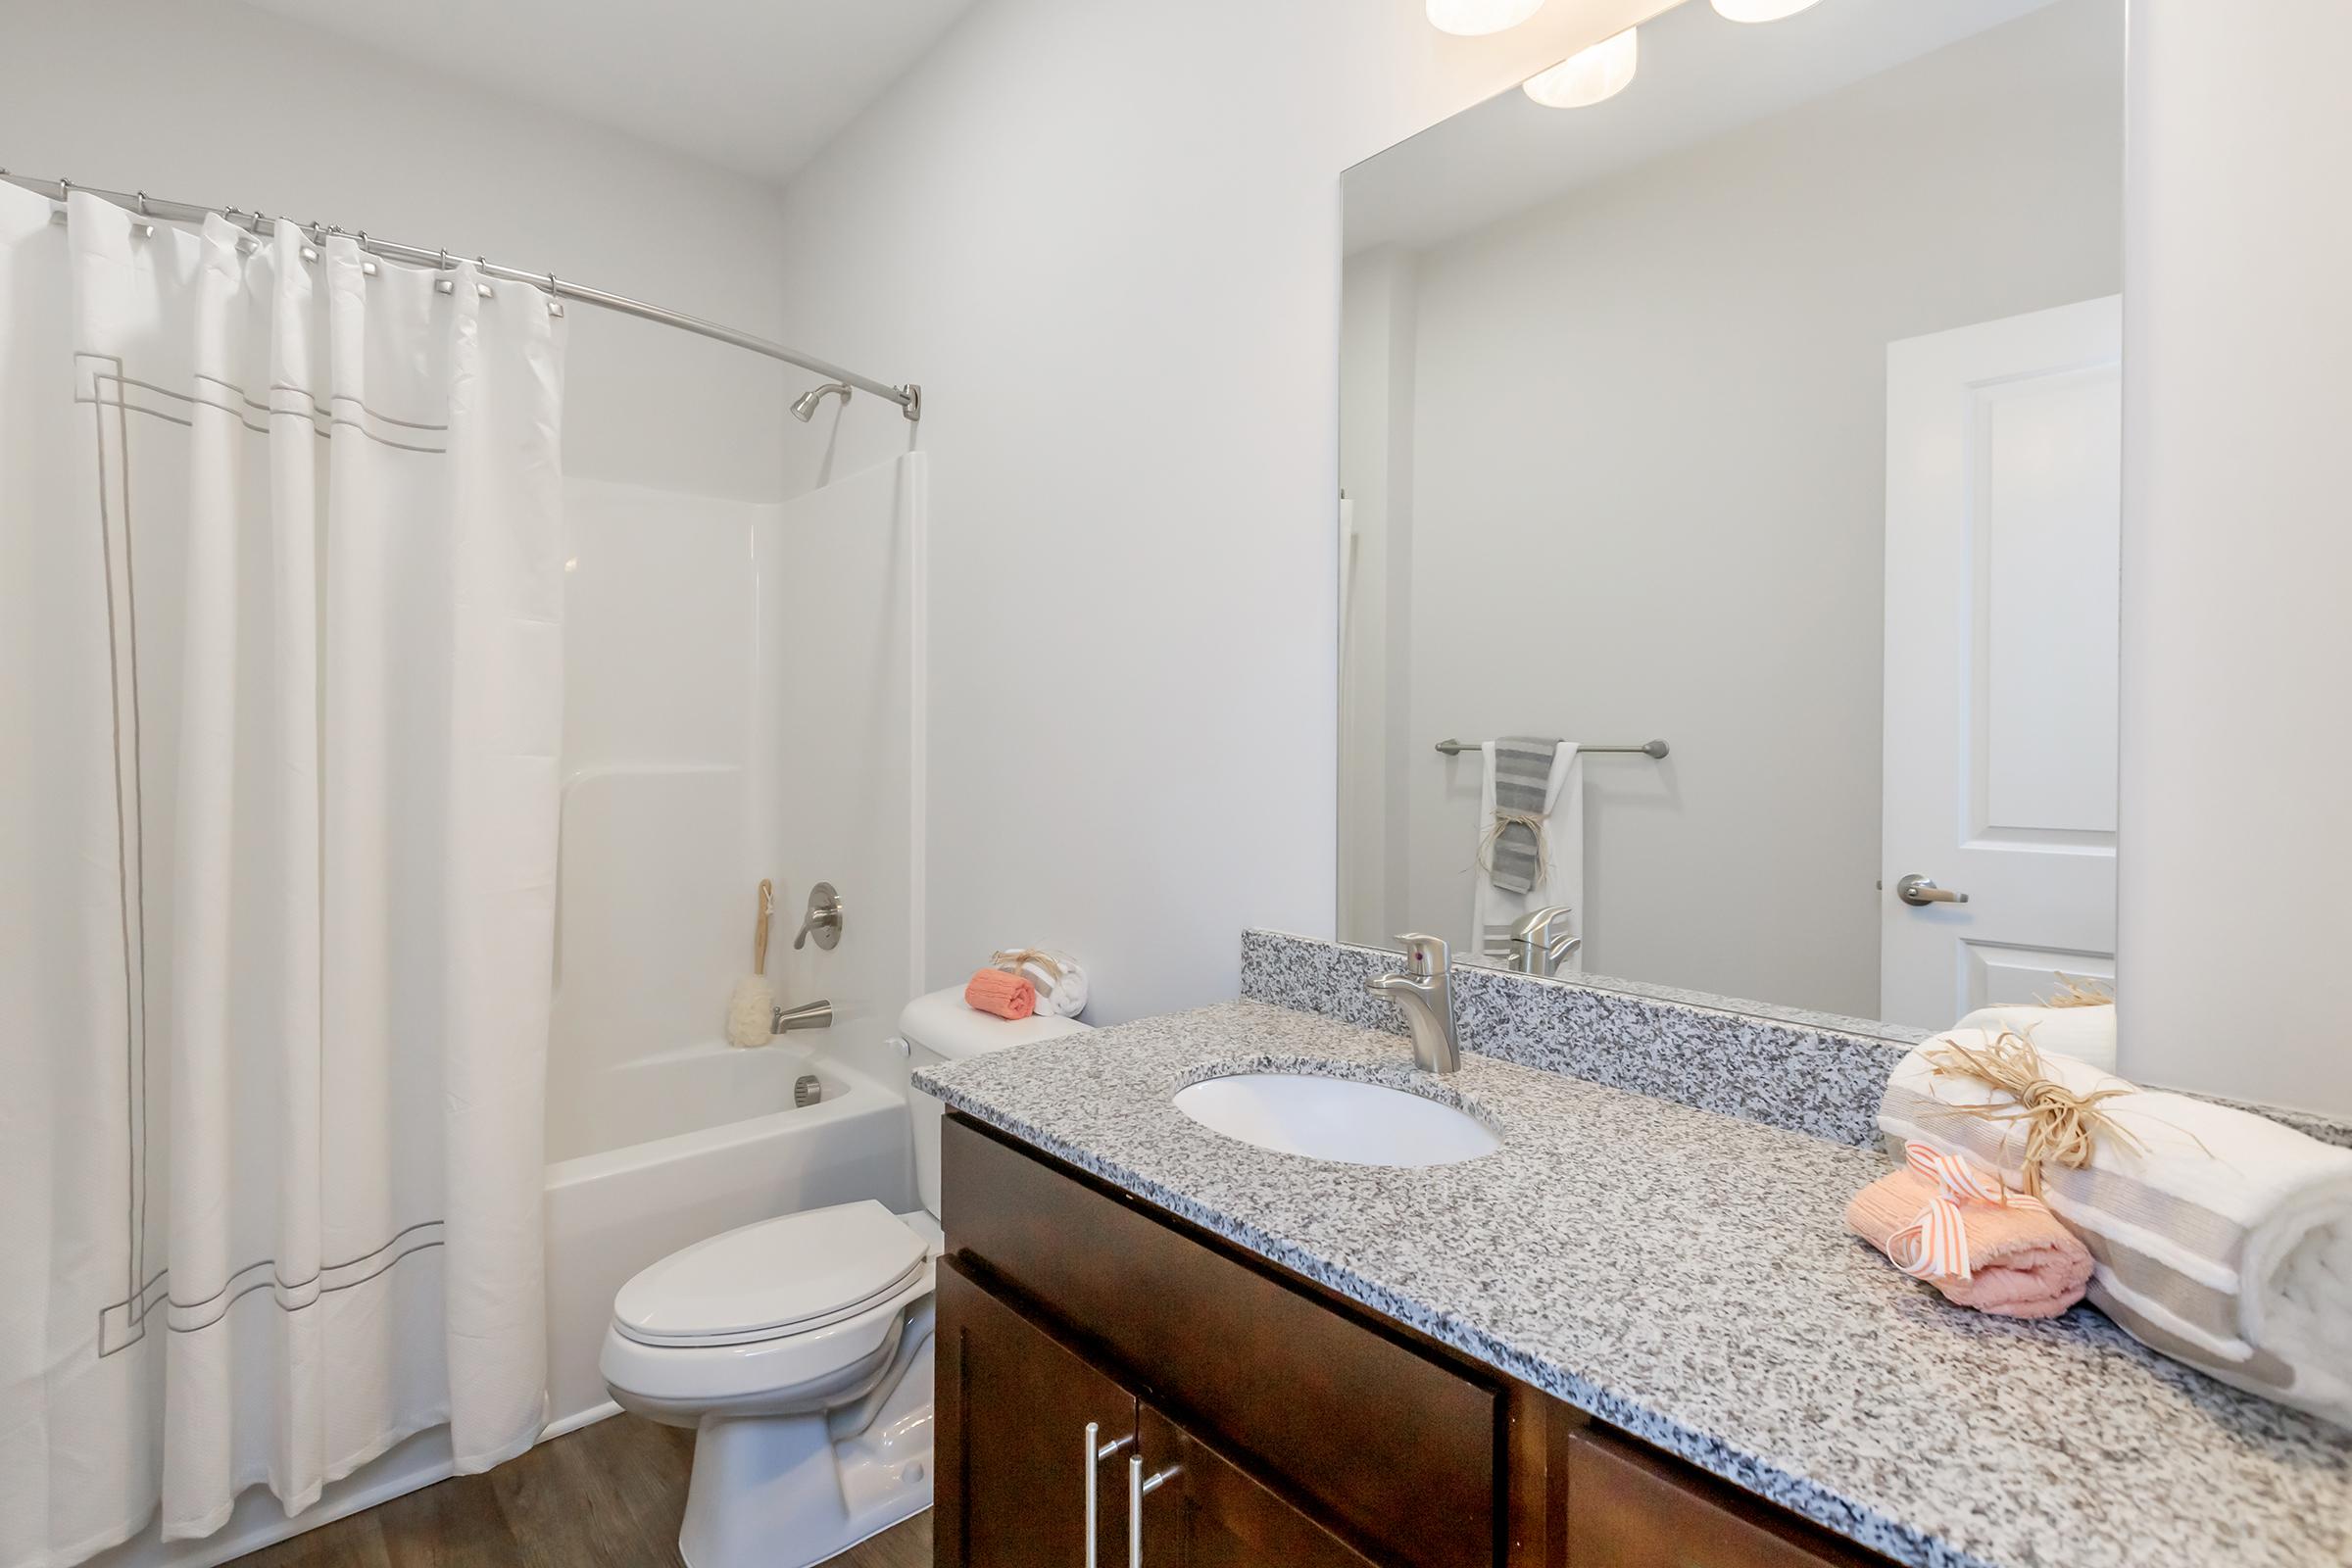 Clarendon Offers Spacious Bathrooms In Riverstone Apartments At Long Shoals In Arden, NC